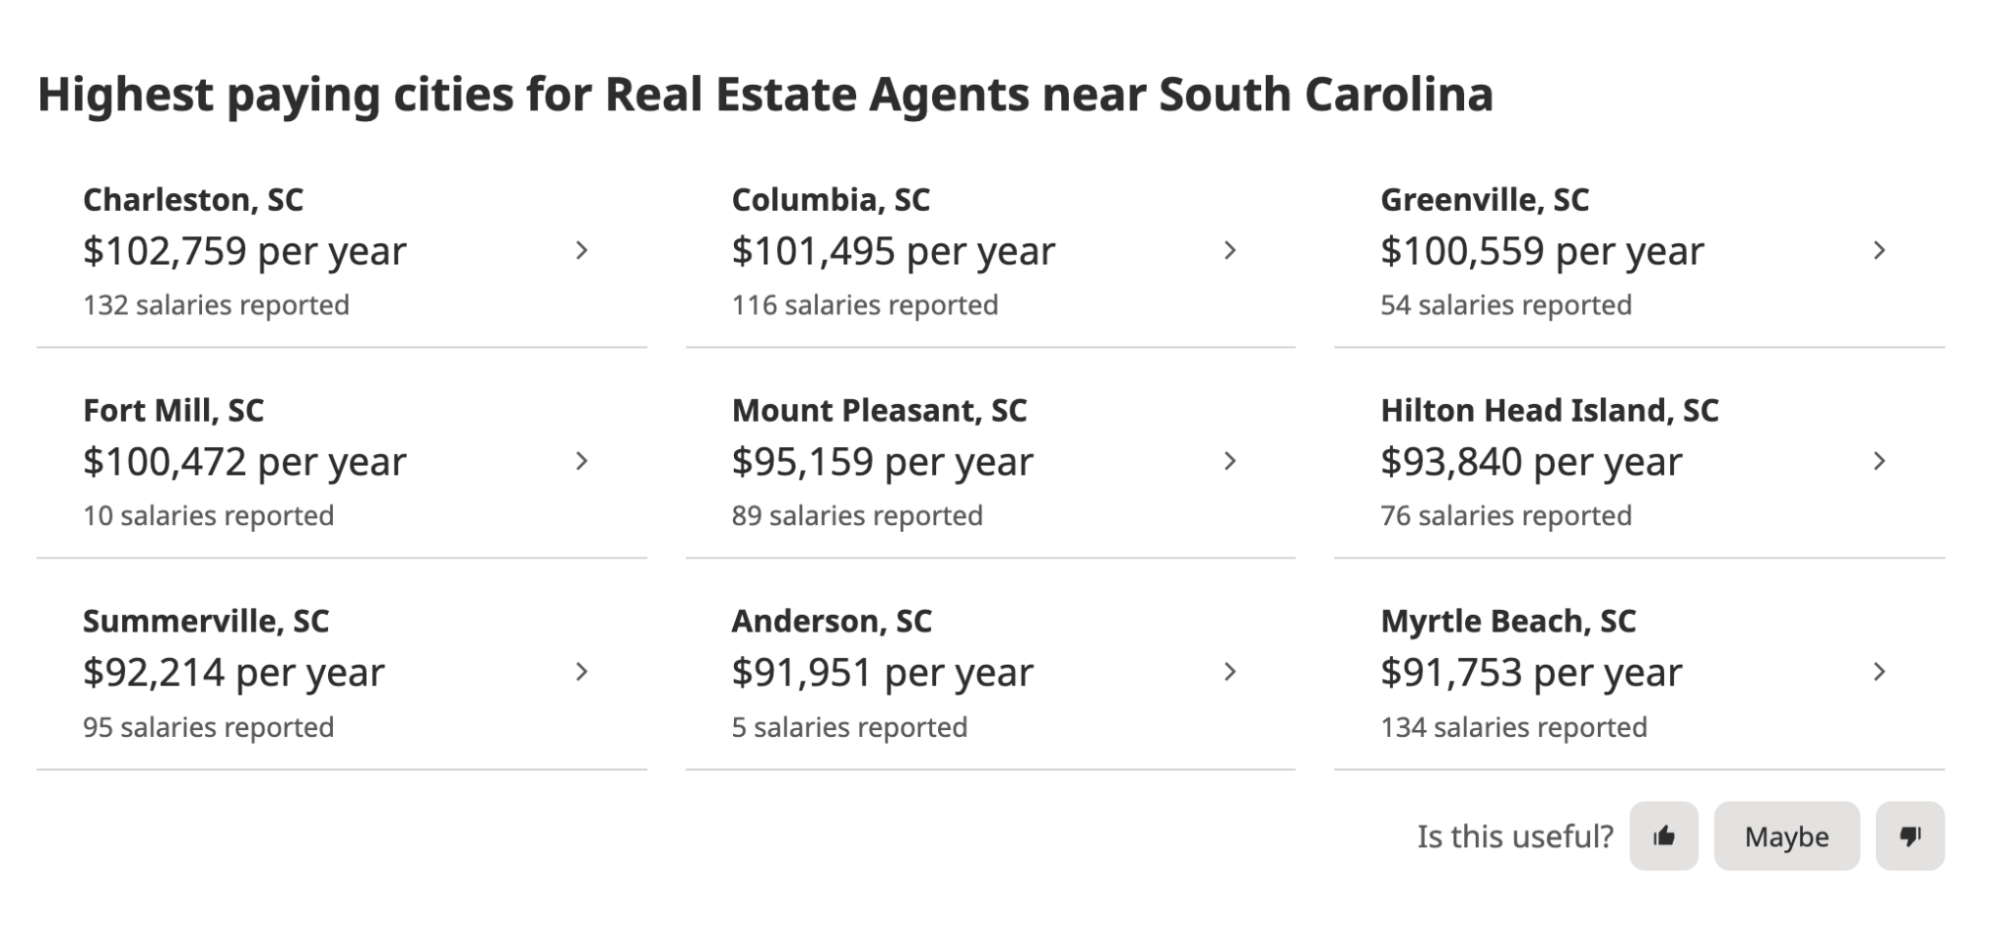 Information for highest paying cities for real estate agent in South Carolina.